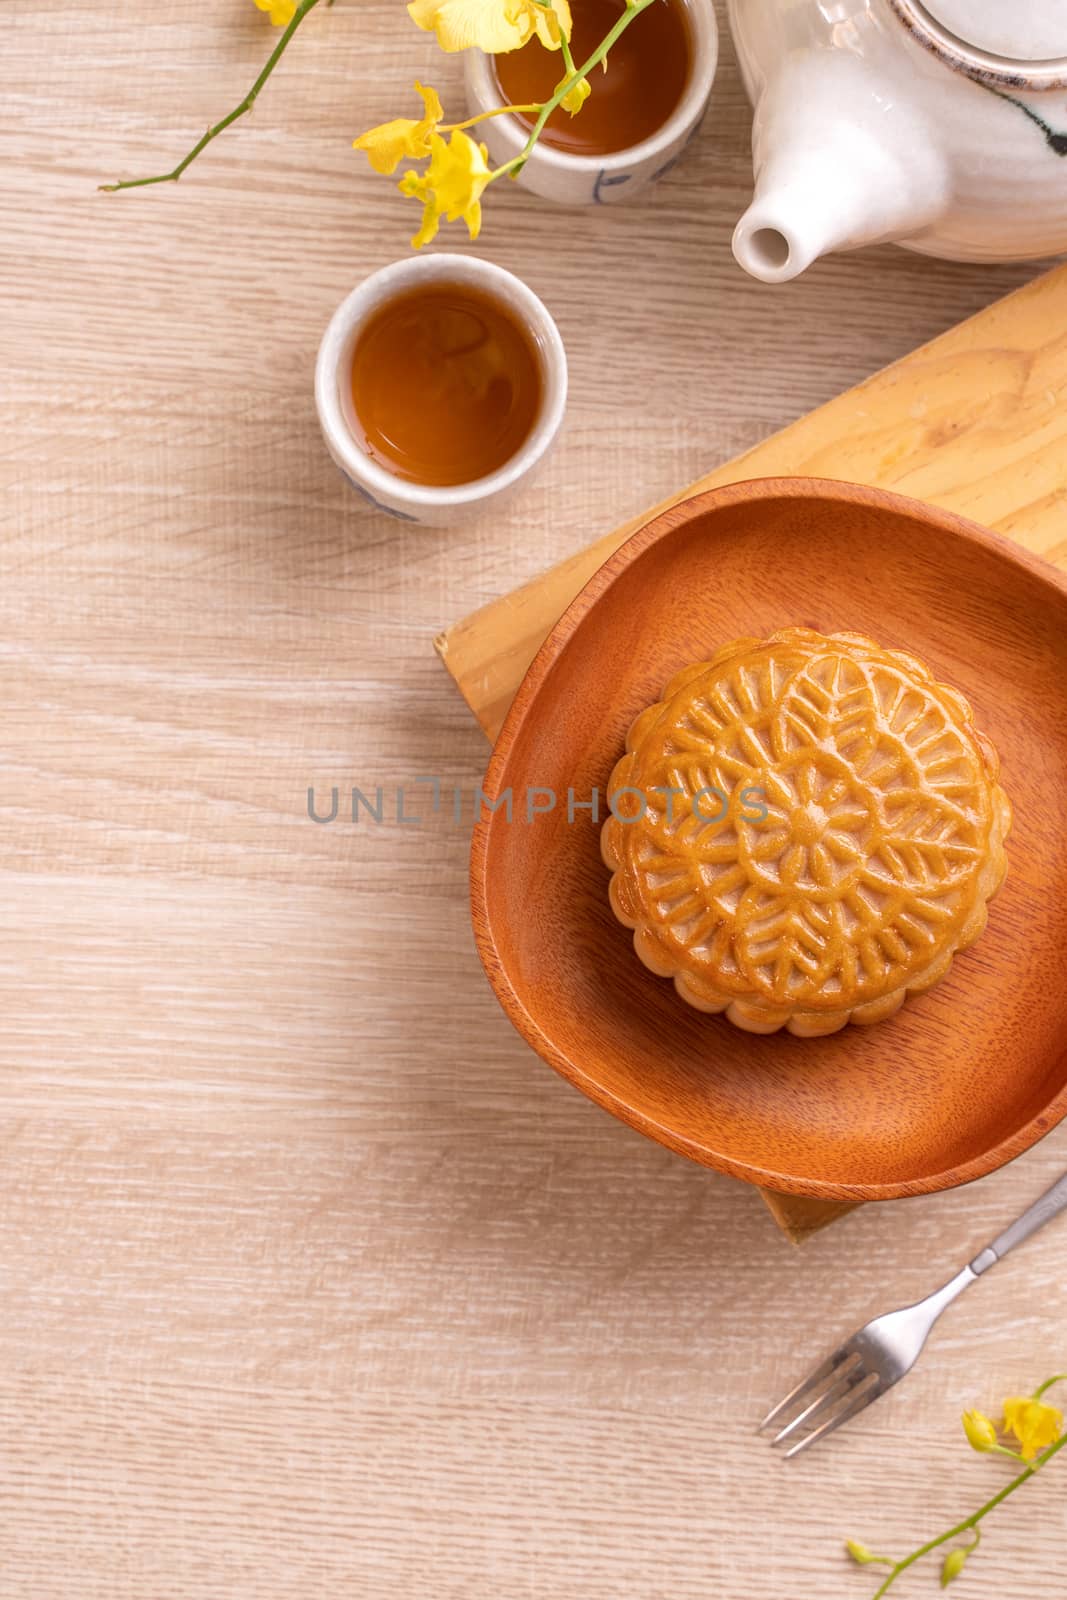 Mid-Autumn Festival holiday concept design of moon cake, mooncakes, tea set on bright wooden table with copy space, top view, flat lay, overhead shot